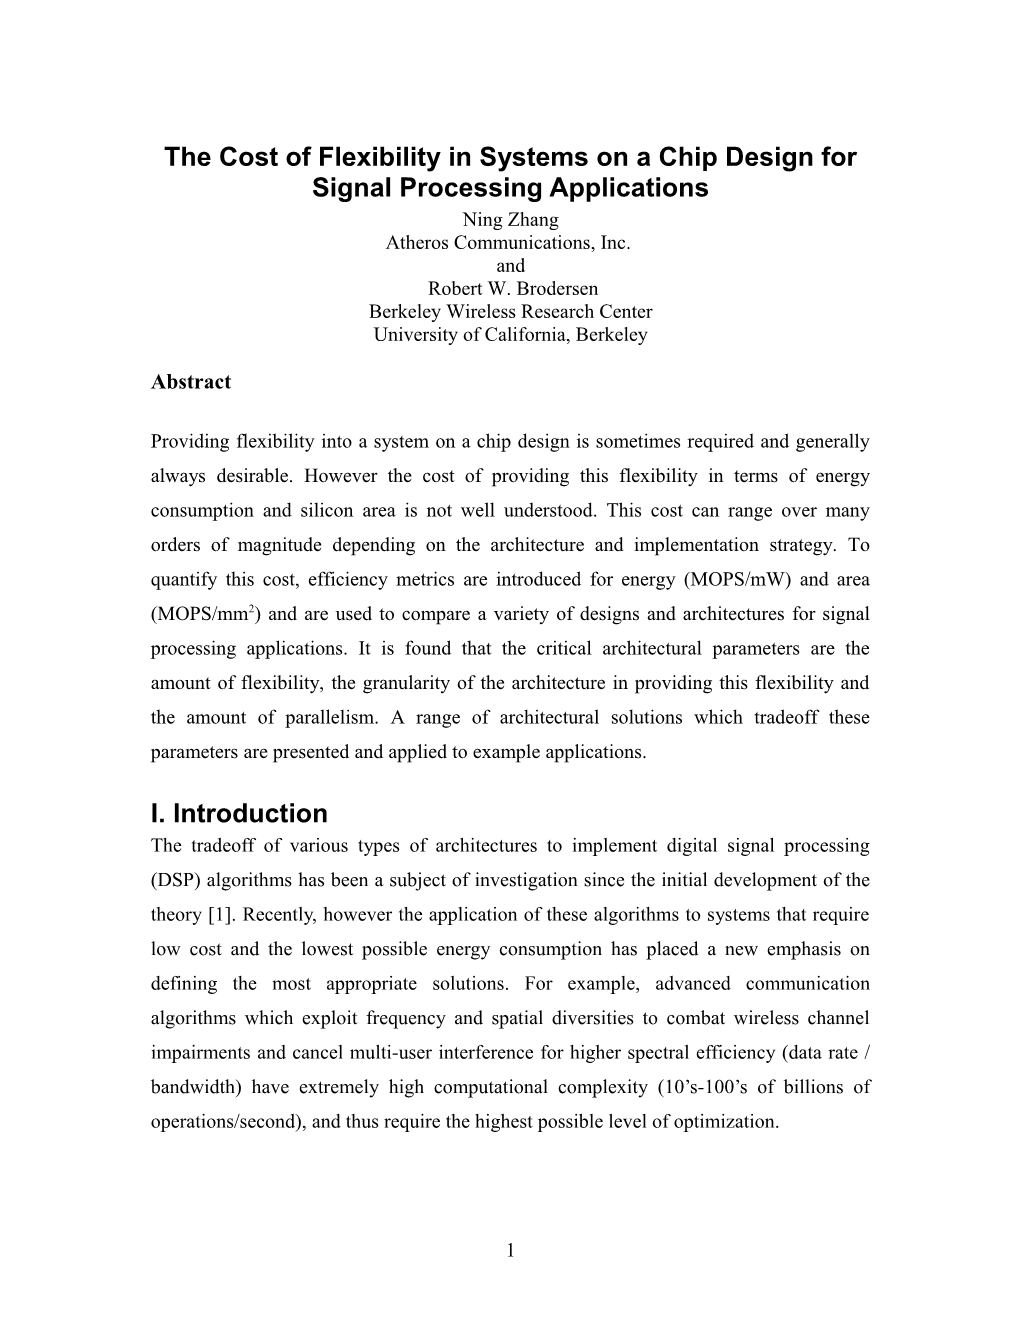 The Cost of Flexibility in Signal Processing Systems